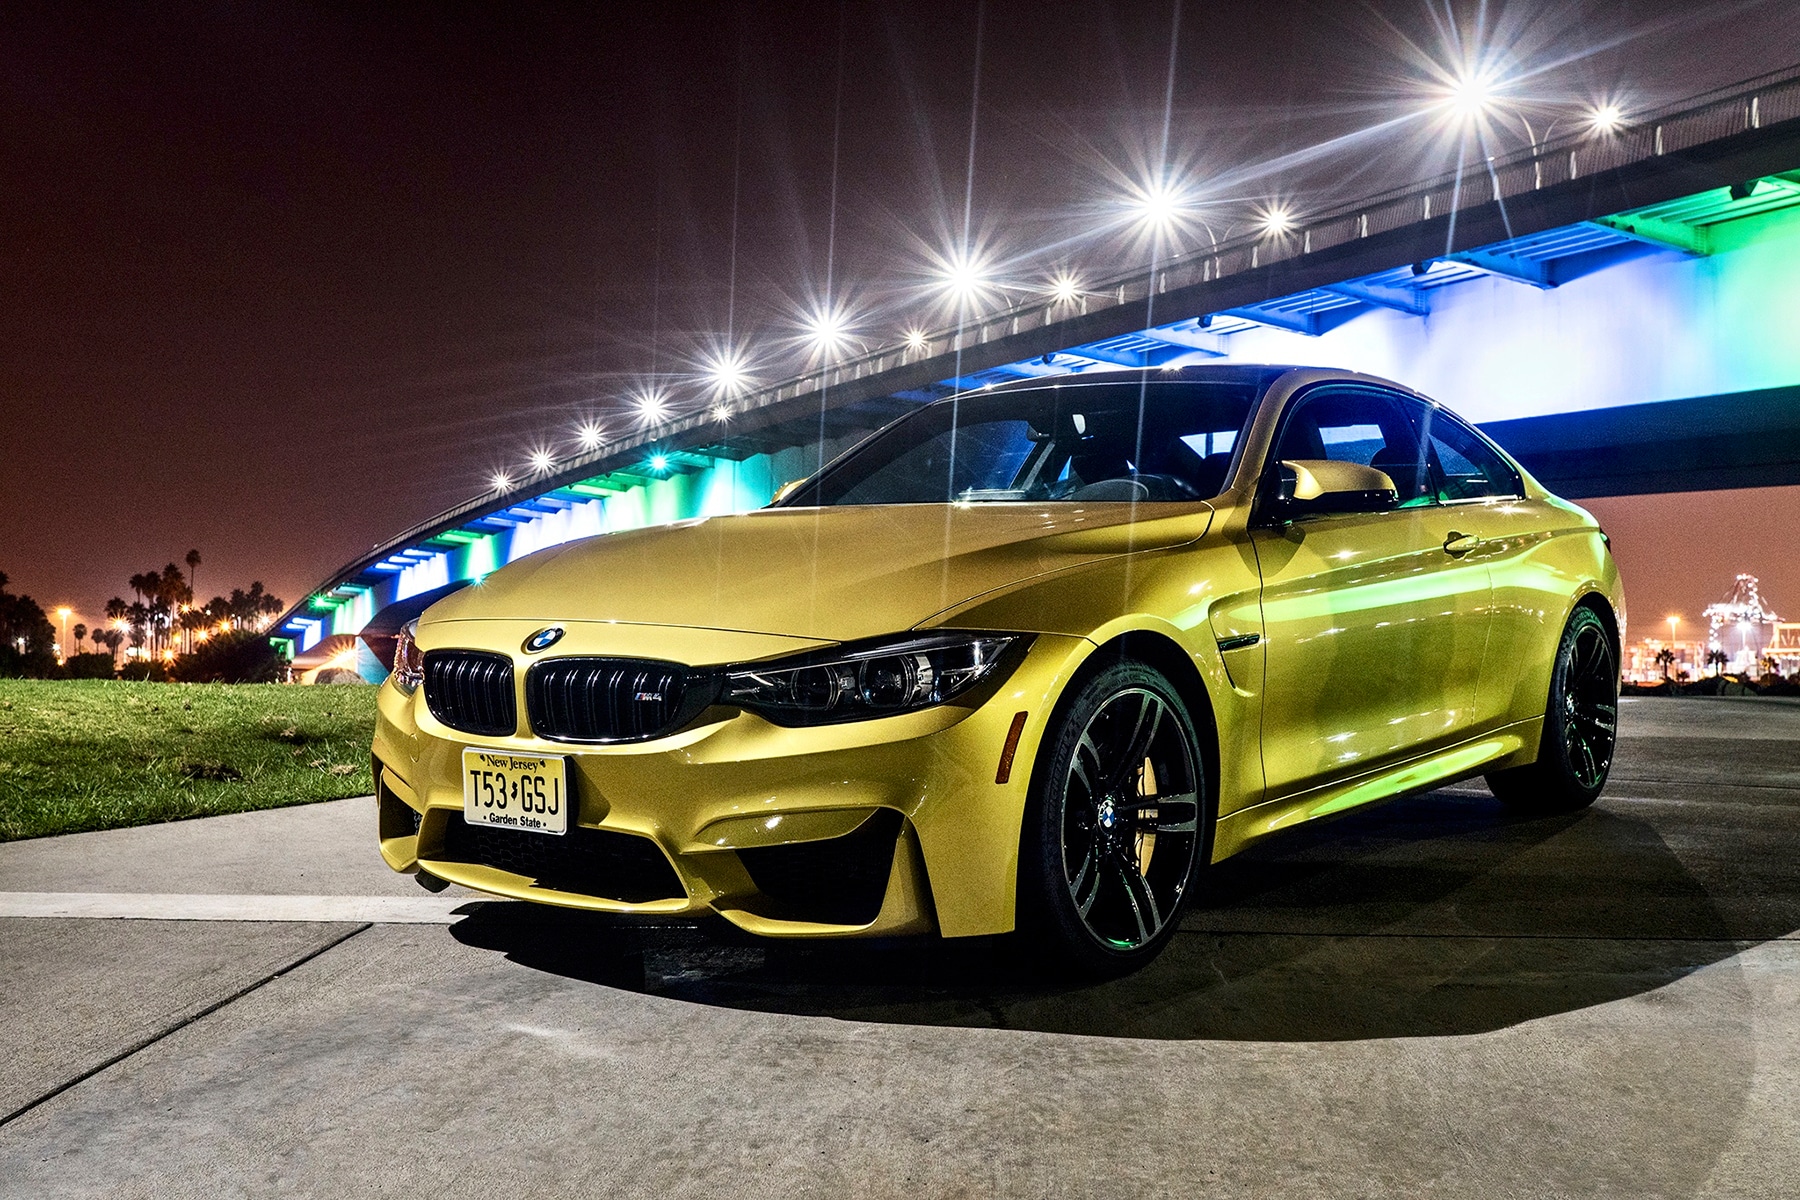 10 Things to Love About the 2018 BMW M4 Coupe